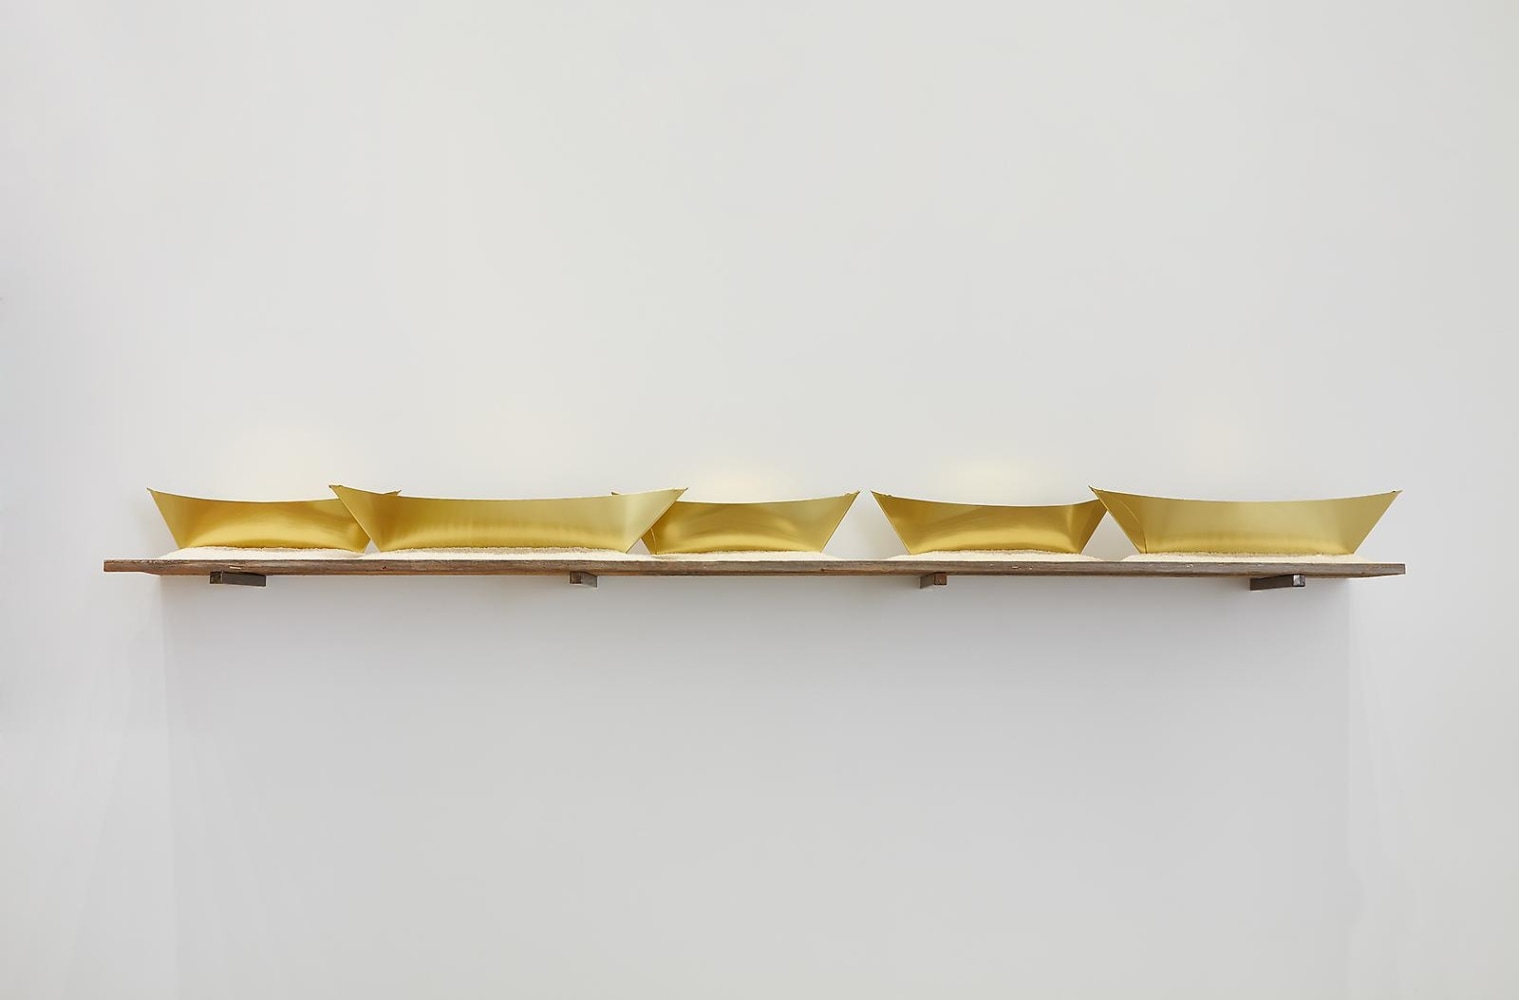 Wolfgang Laib
Passageway, 2013
5 brass ships, rice, wood and steel
6 3/4 x 103 x 12 inches (17,2 x 262 x 30,5 cm) overall
SW 13141